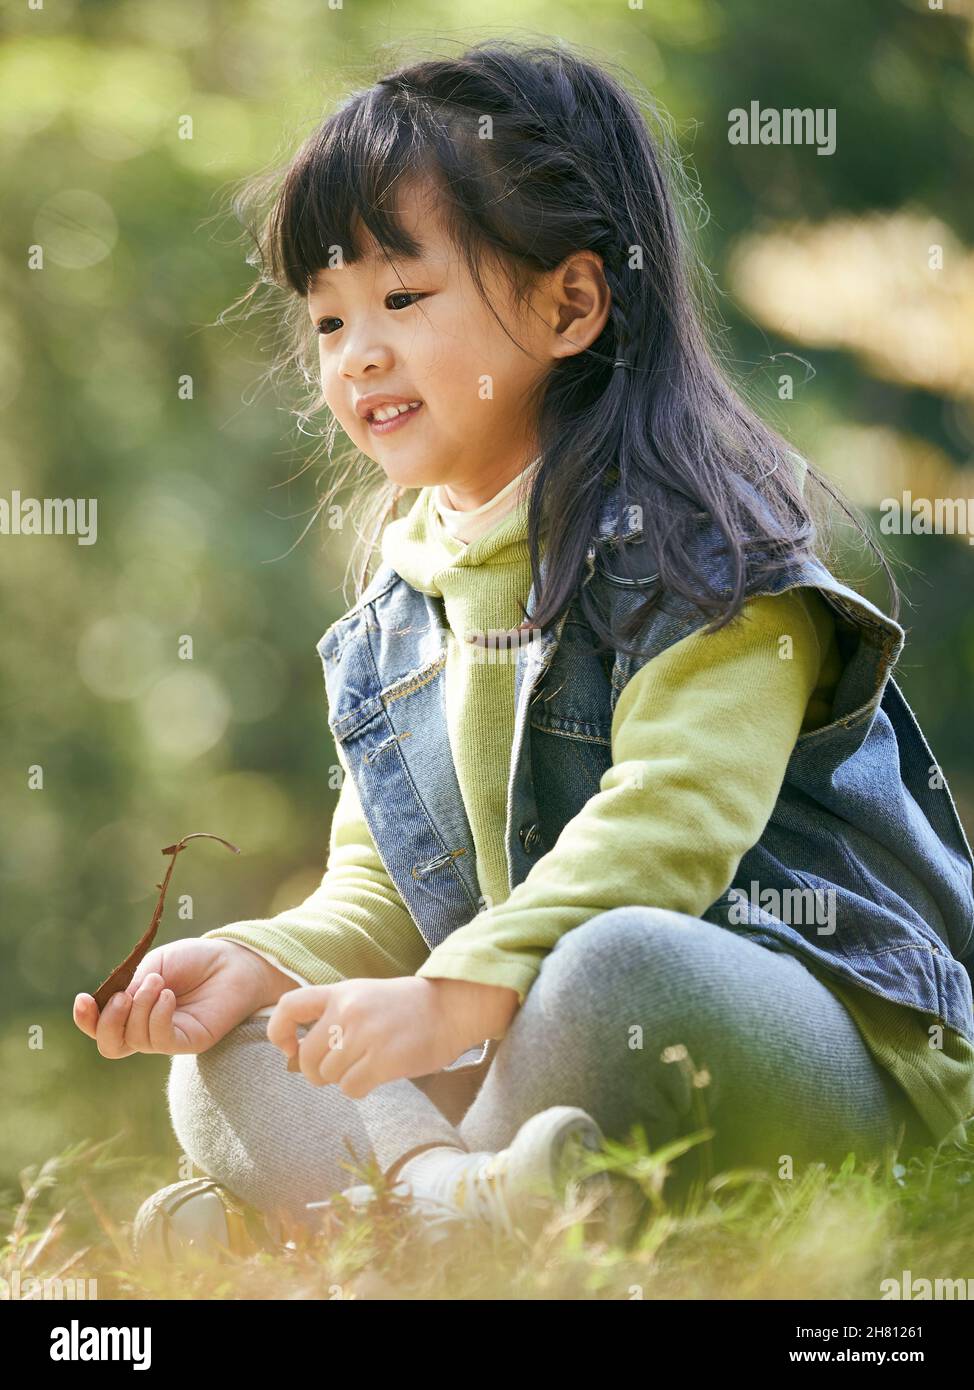 outdoor portrait of an asian little girl sitting on grass happy and smiling Stock Photo